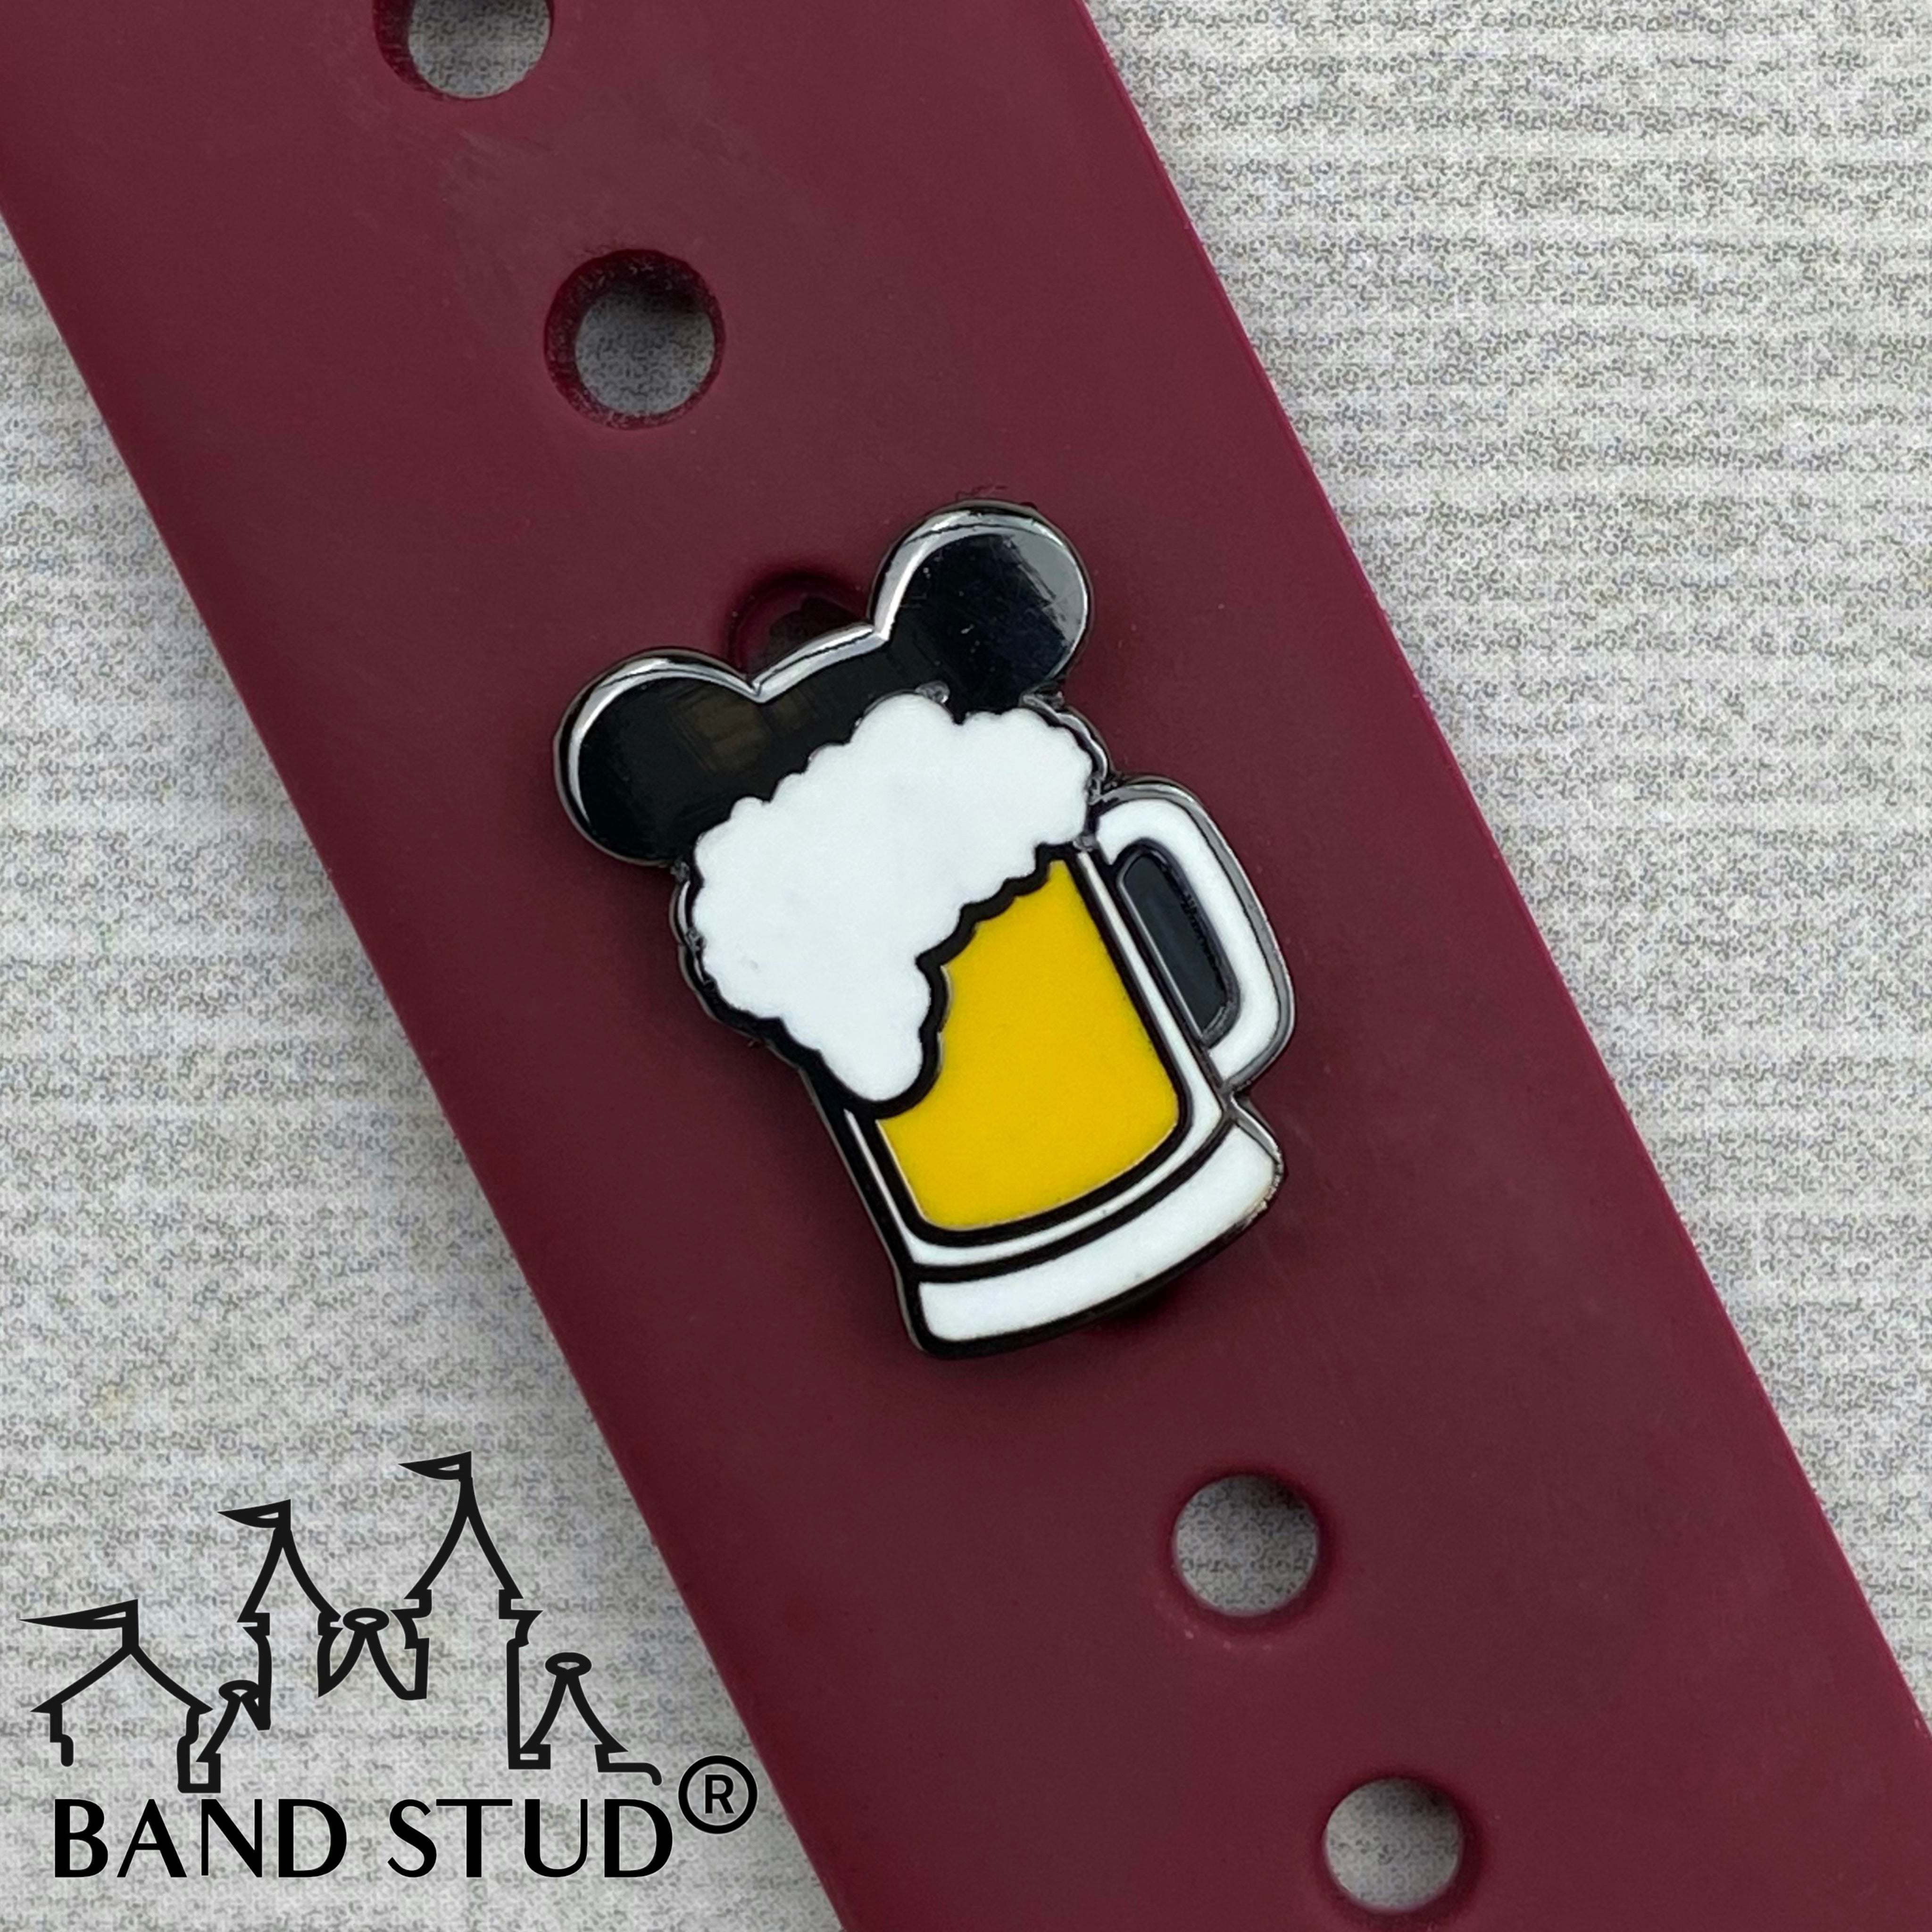 Band Stud® - Food and Wine Collection - Beer